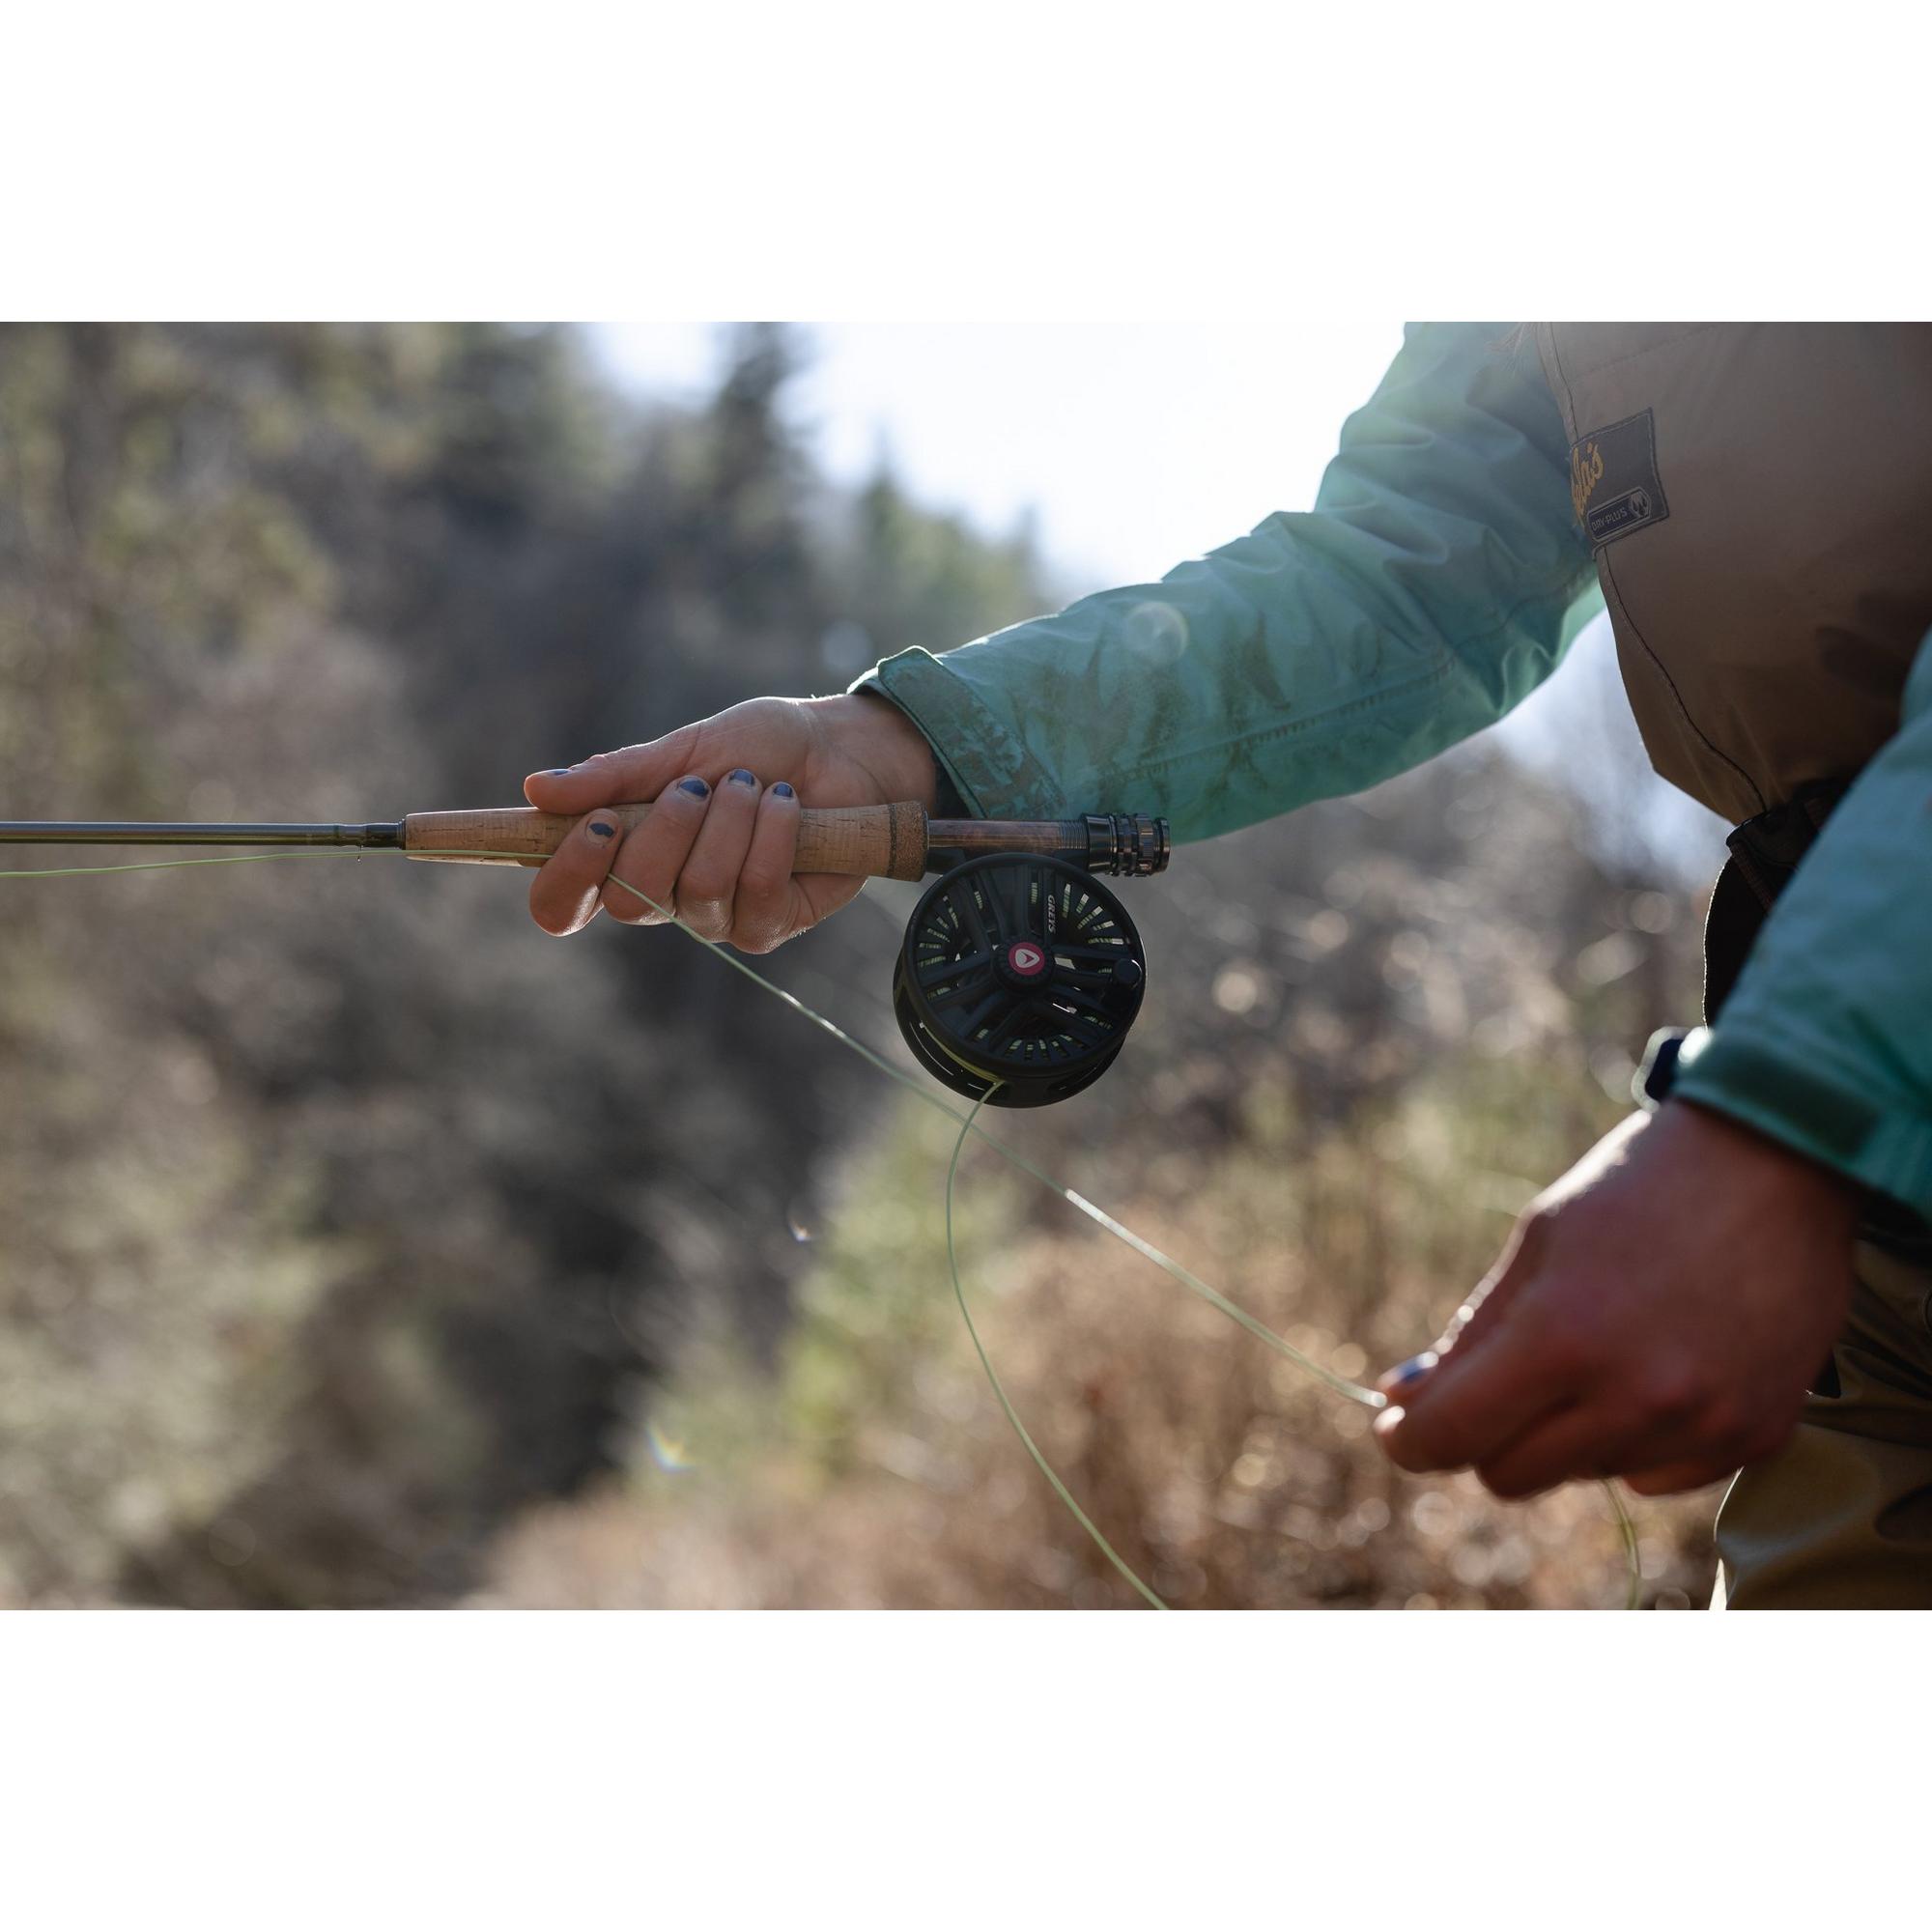 Grey's Fin Fly Reel – Out Fly Fishing